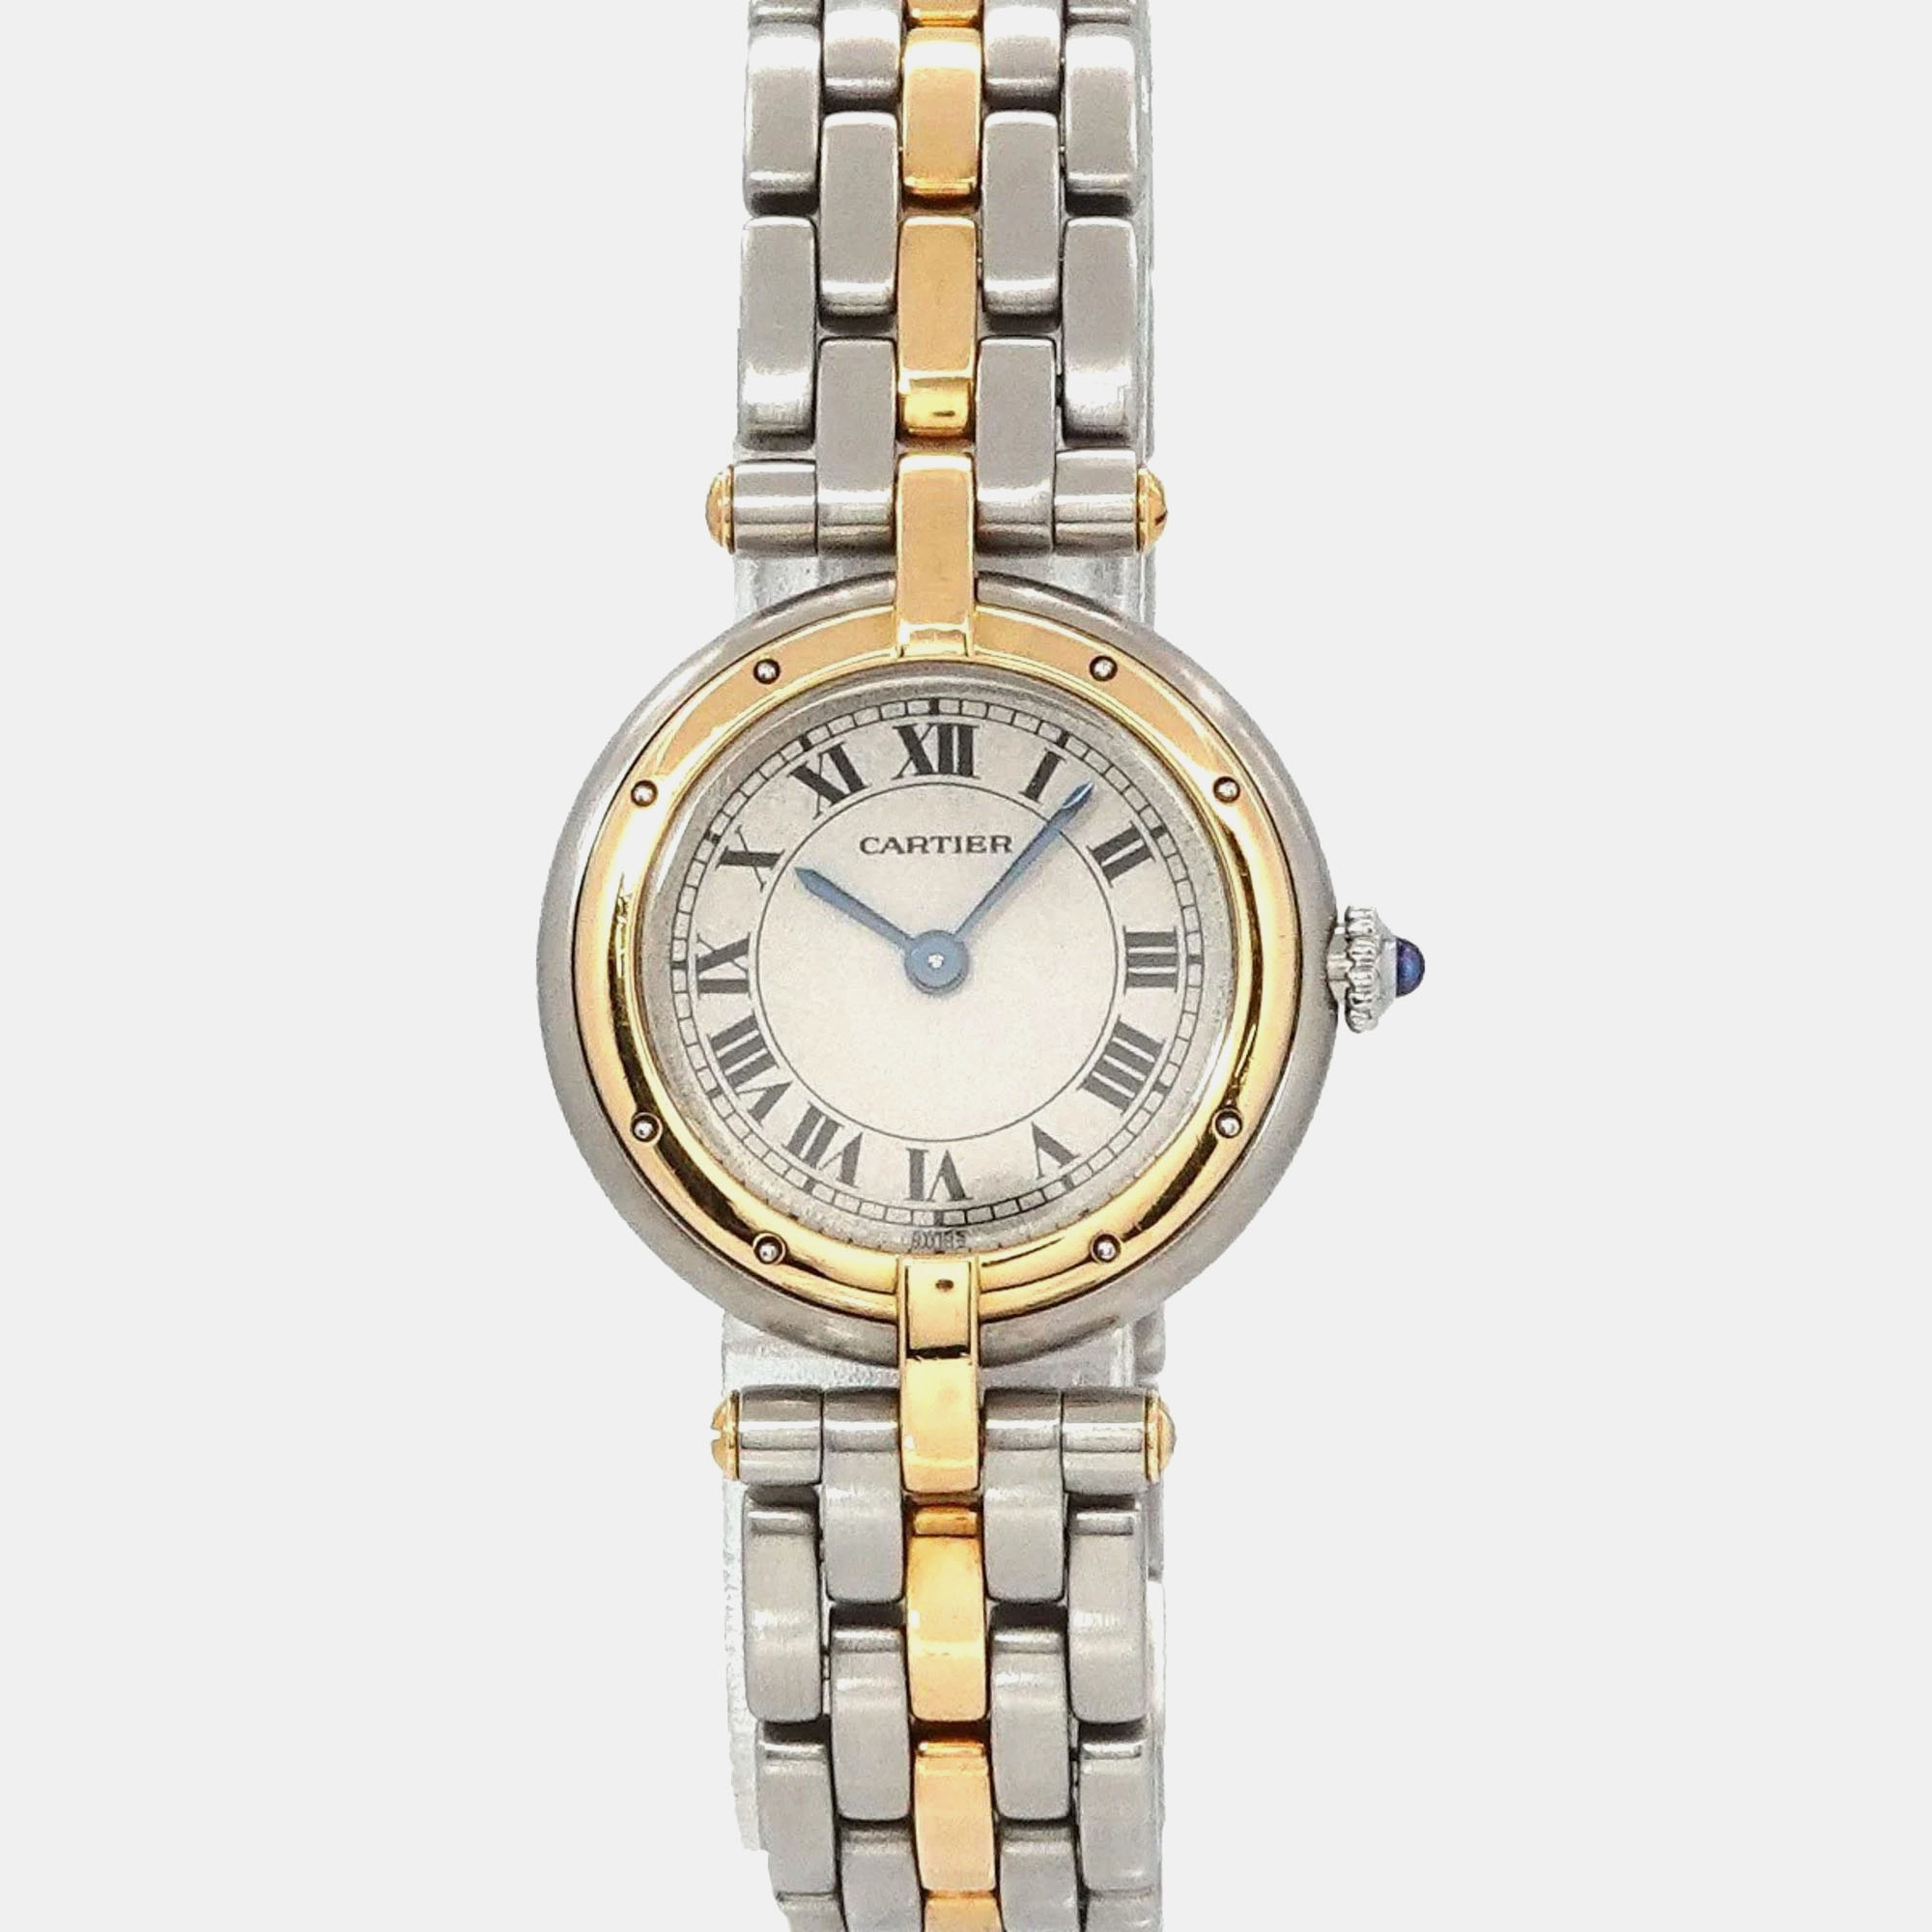 Cartier ivory 18k yellow gold and stainless steel panthere women's wristwatch 24 mm